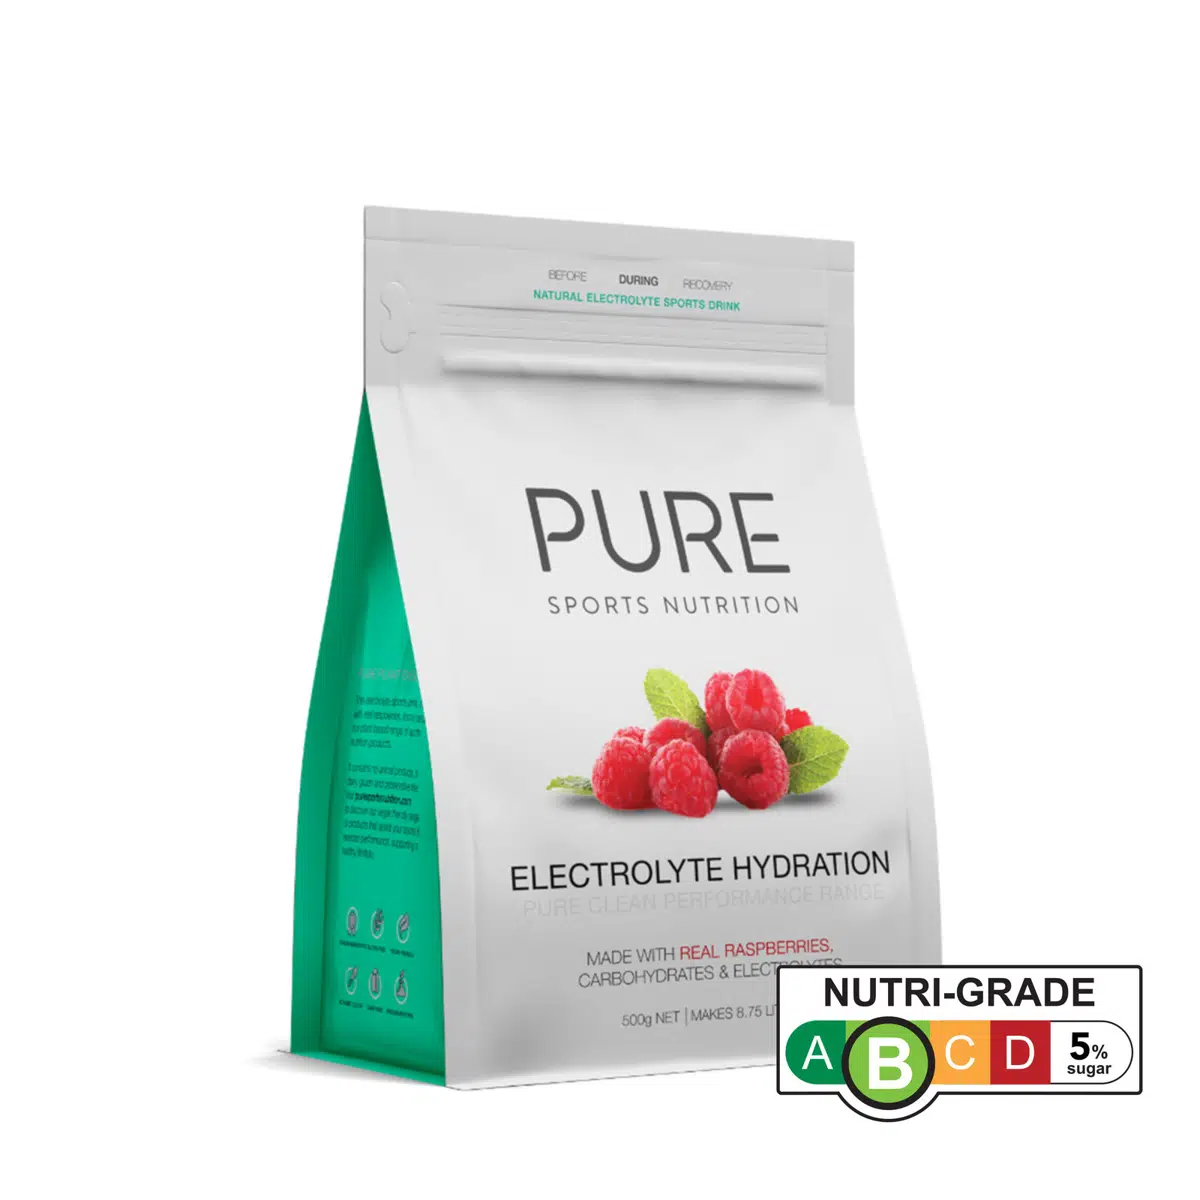 PURE Electrolyte Hydration 500g Pouch